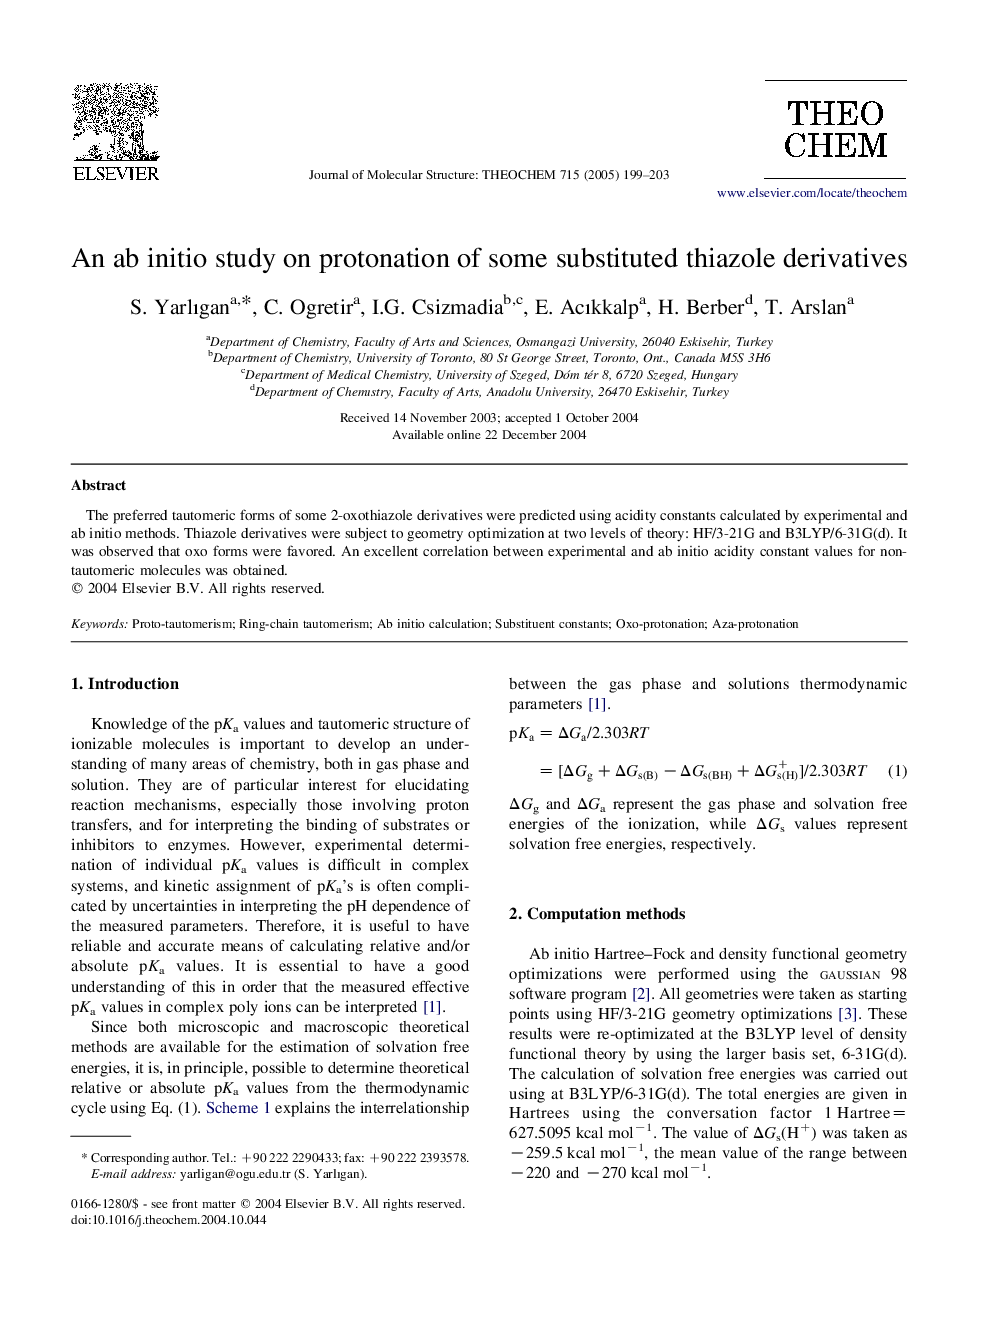 An ab initio study on protonation of some substituted thiazole derivatives